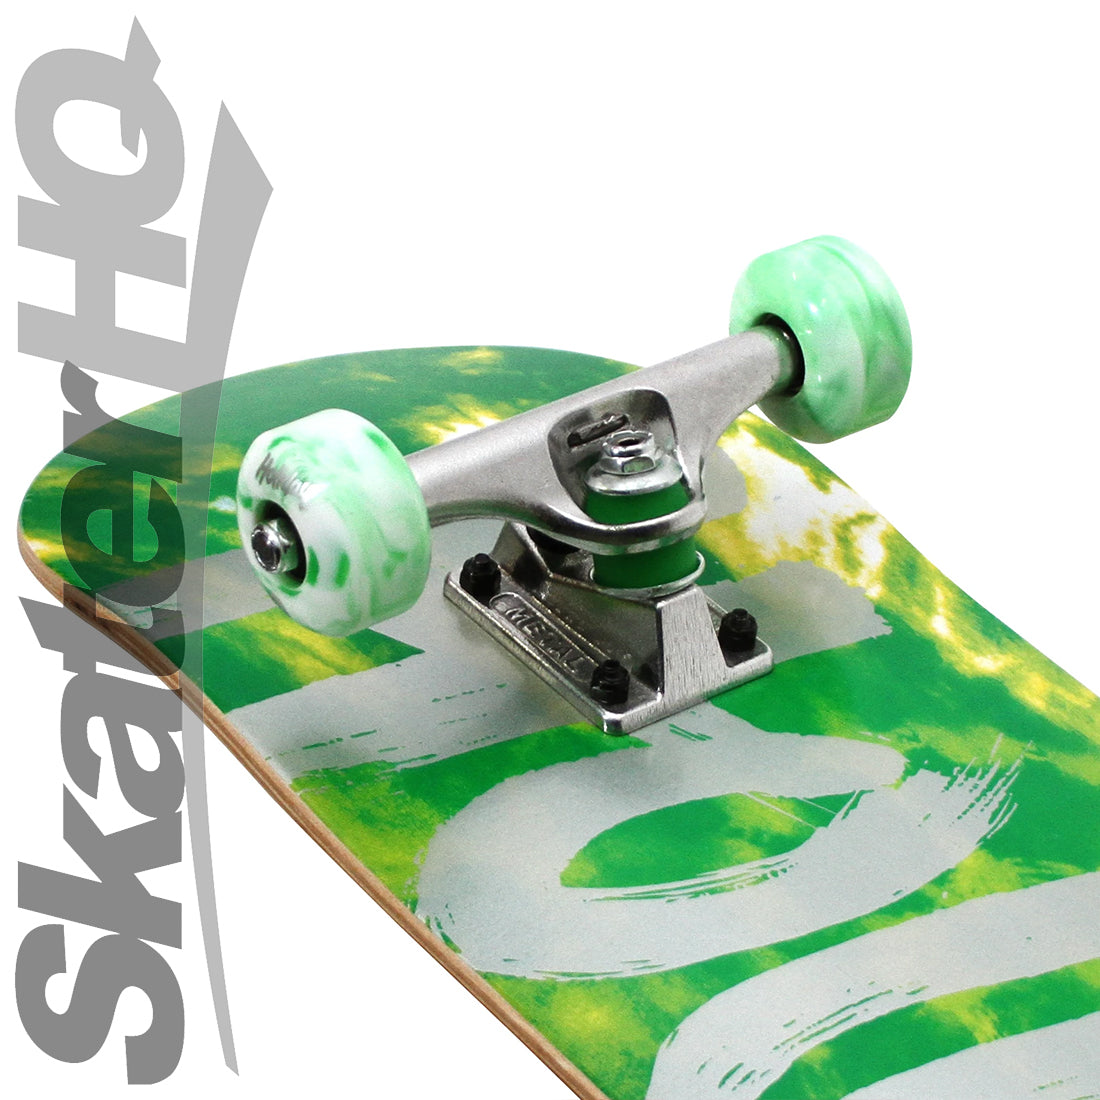 Holiday Tie Dye 7.75 Complete - Green/Silver Skateboard Completes Modern Street